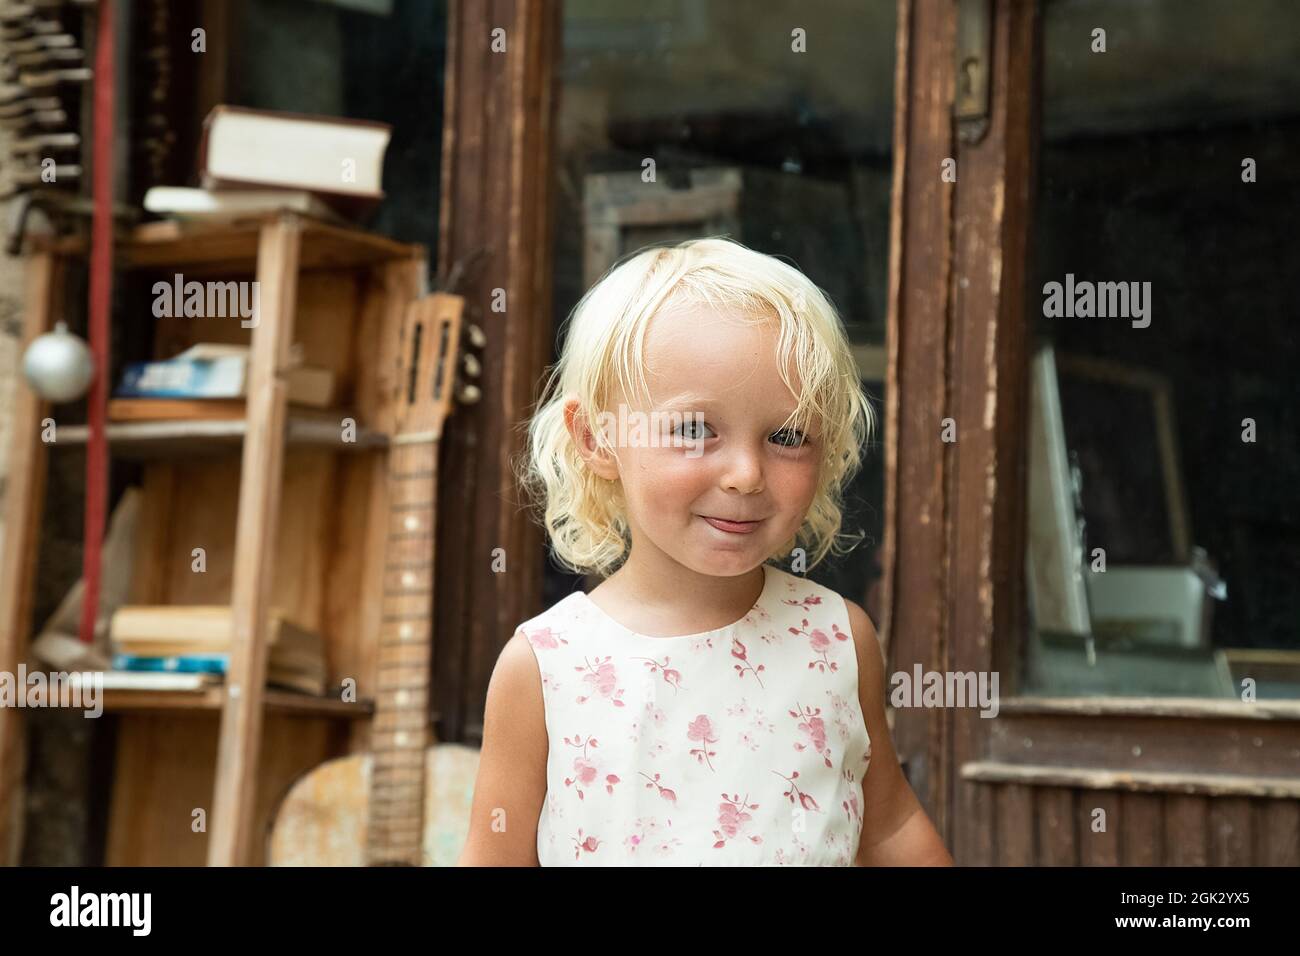 Little blond blue eye girl in white dress with pink flowers portrait. Tricky funny child. Retro style picture. Vintage door with bookshelf and guitar Stock Photo